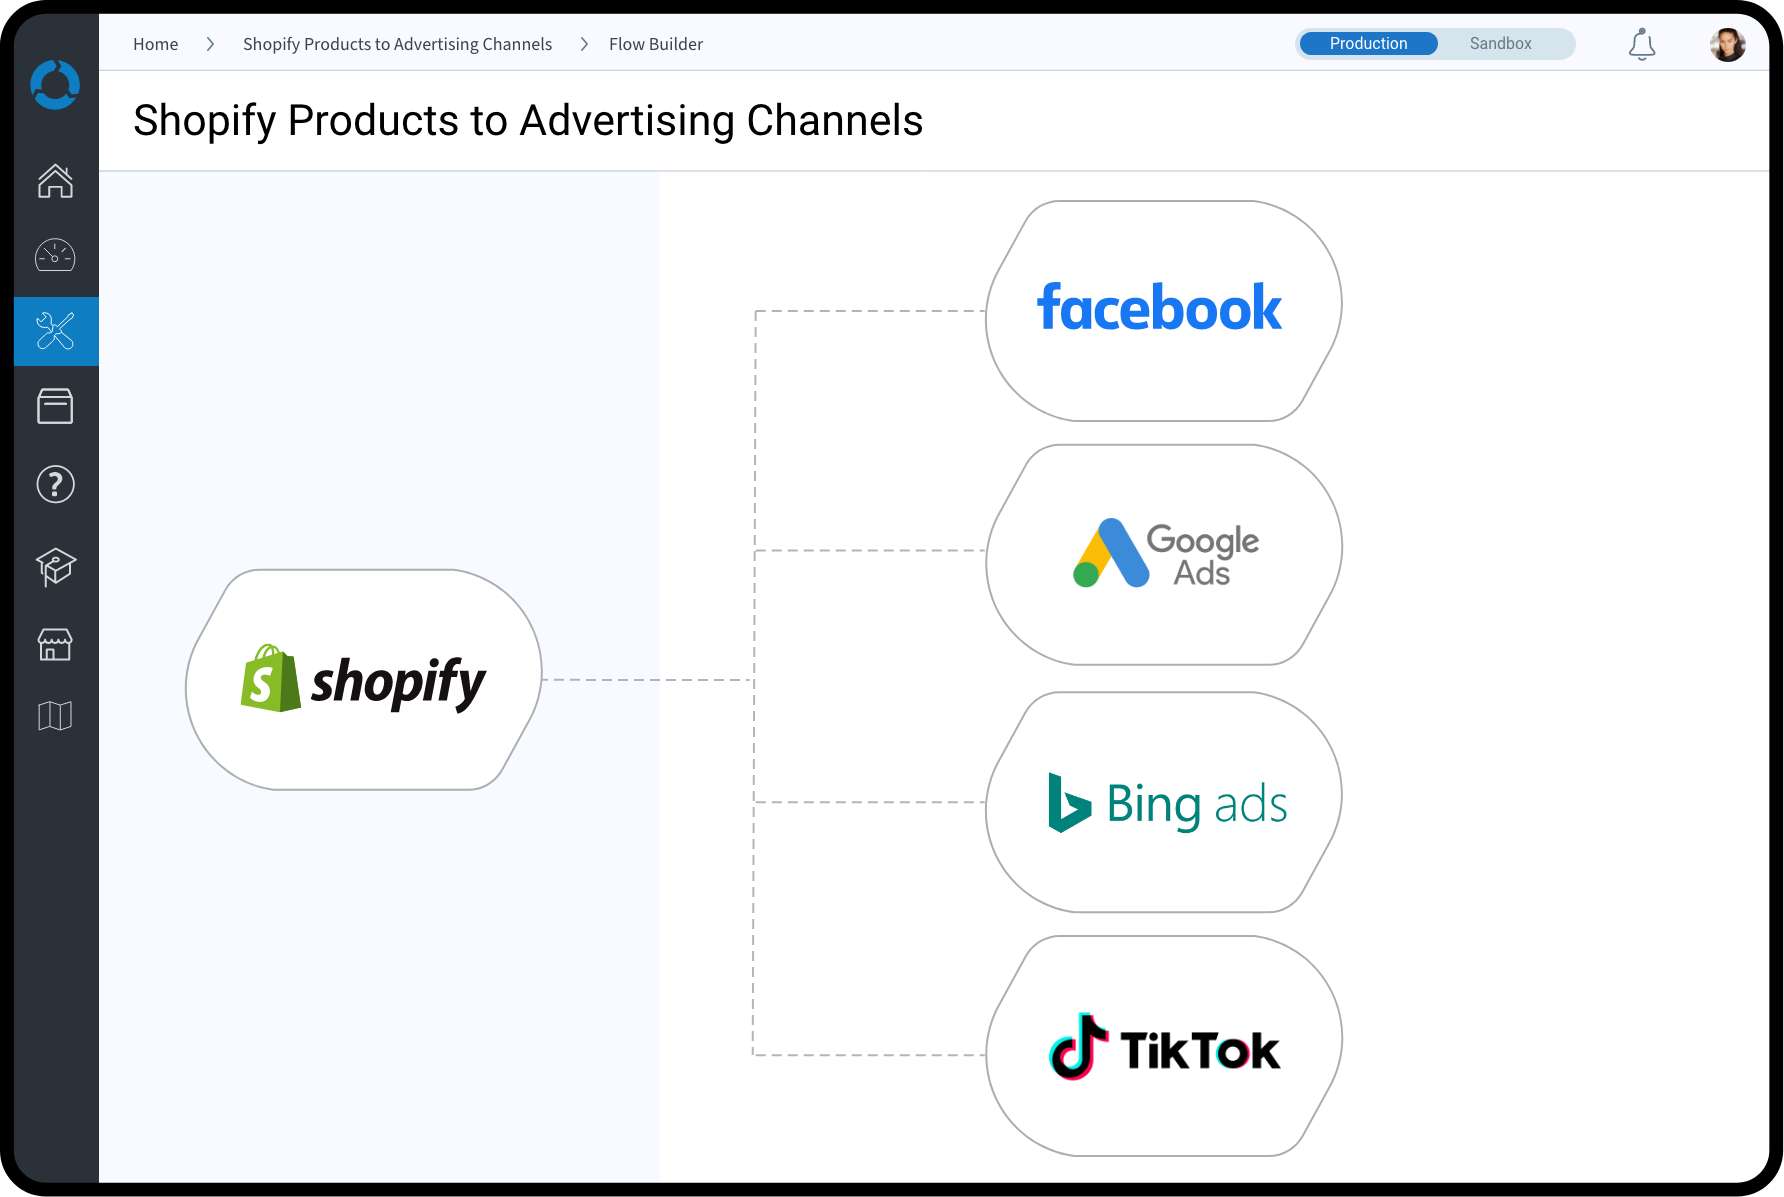  Social and Search Digital Marketing Automation for Ecommerce  - Product Data from Akaneo to Advertising Channels - Shopify Products to Advertising Channels